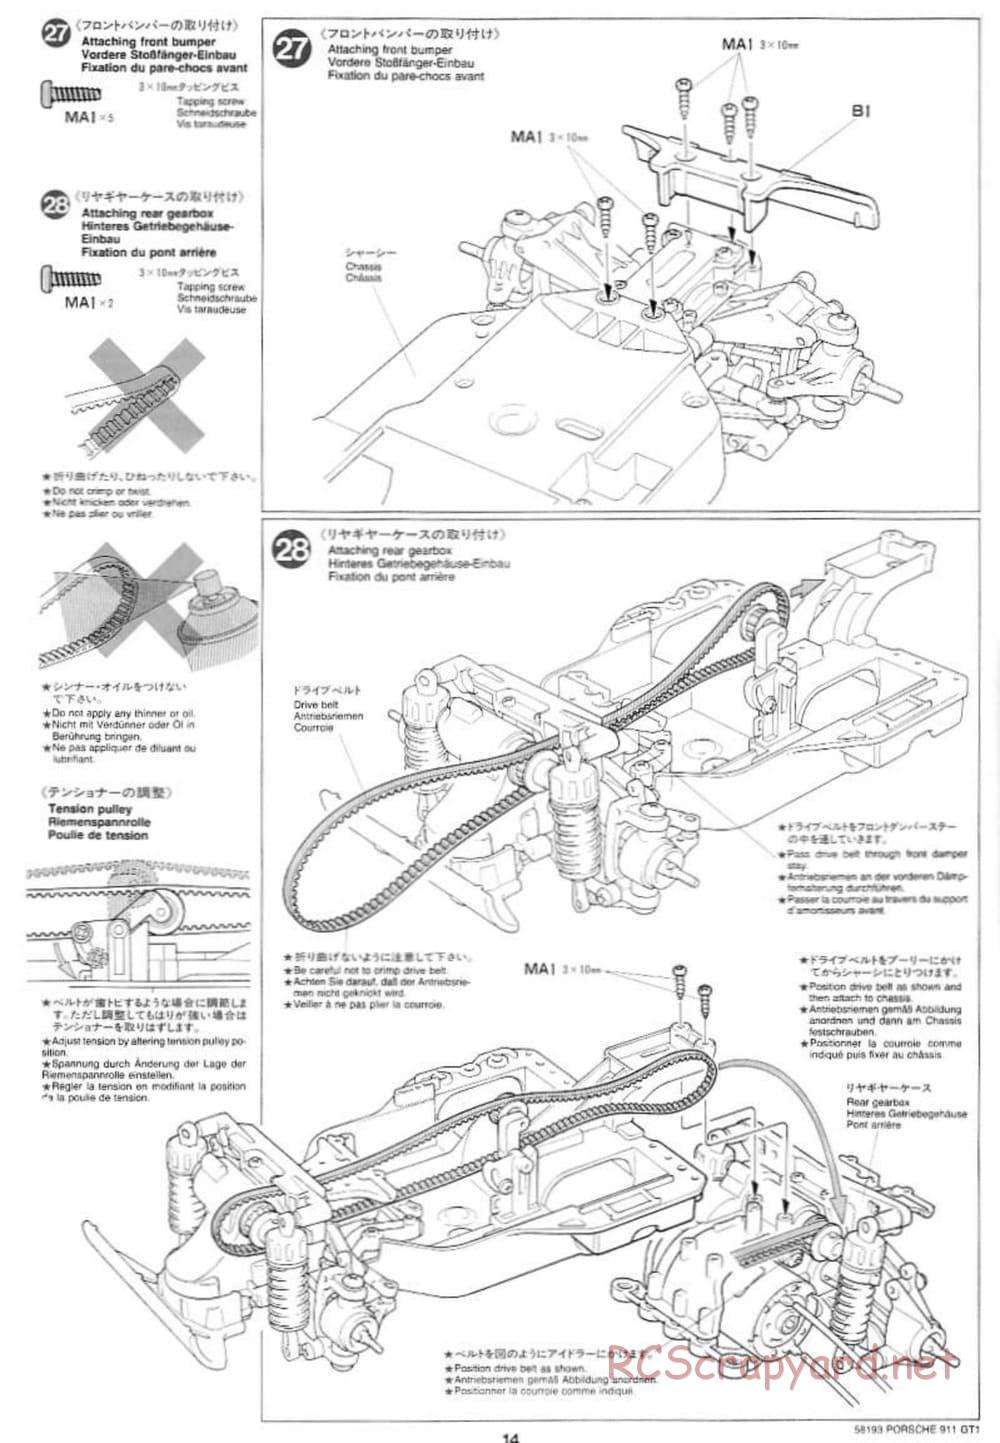 Tamiya - Porsche 911 GT1 - TA-03RS Chassis - Manual - Page 14